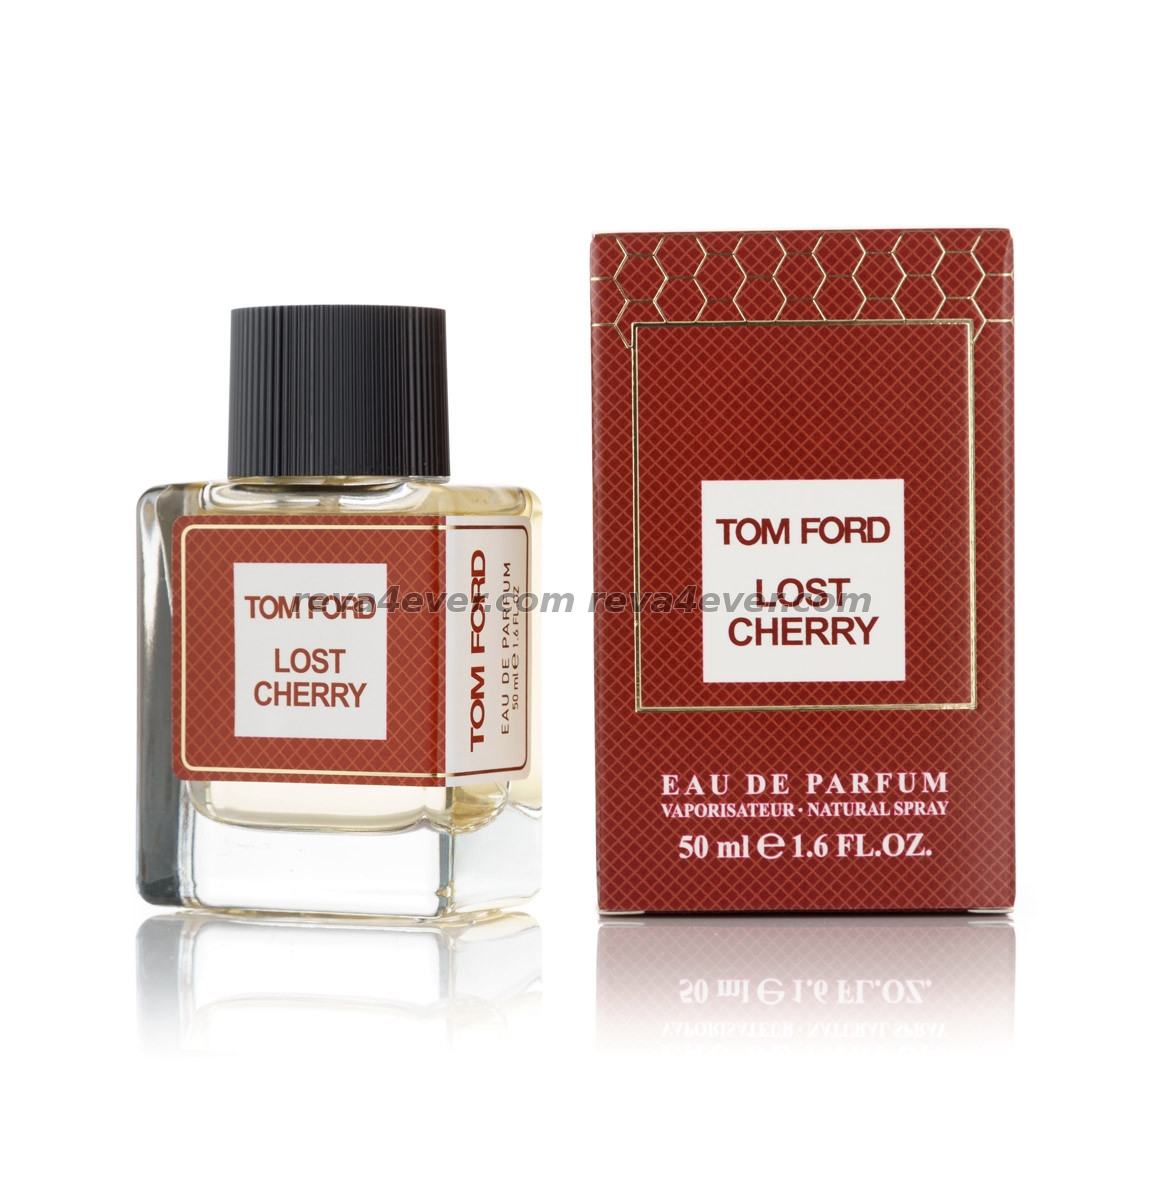 Tom Ford Lost Cherry edp 50 ml color box